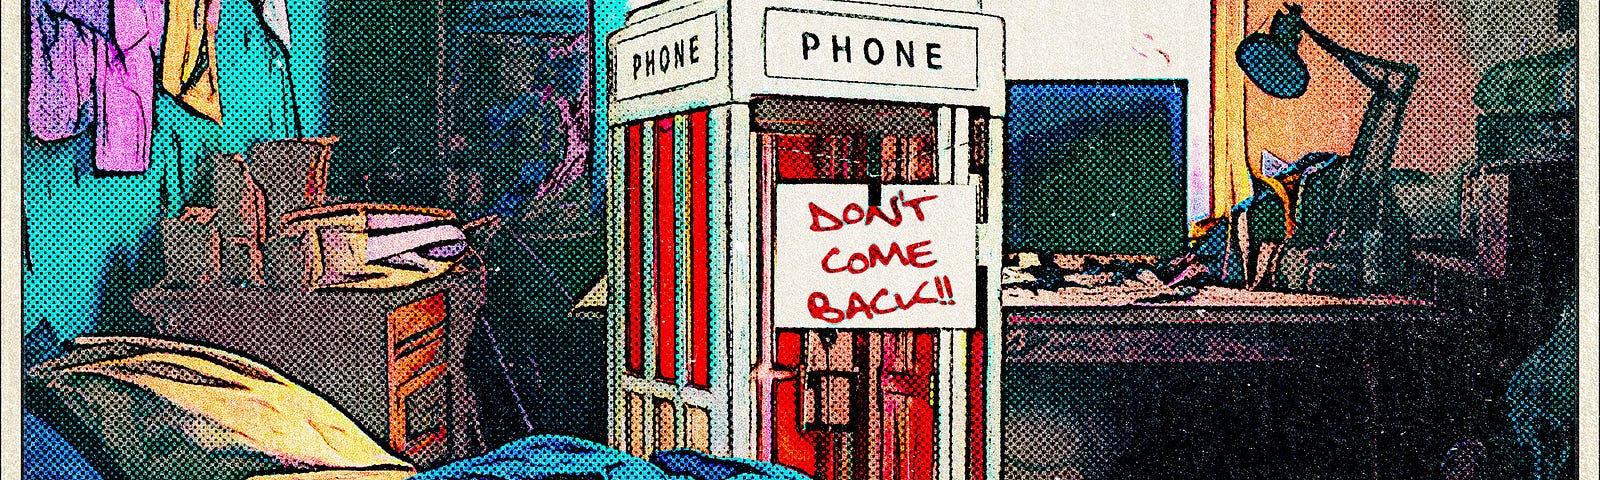 Phone booth in bedroom with sign “Don’t come back!!”